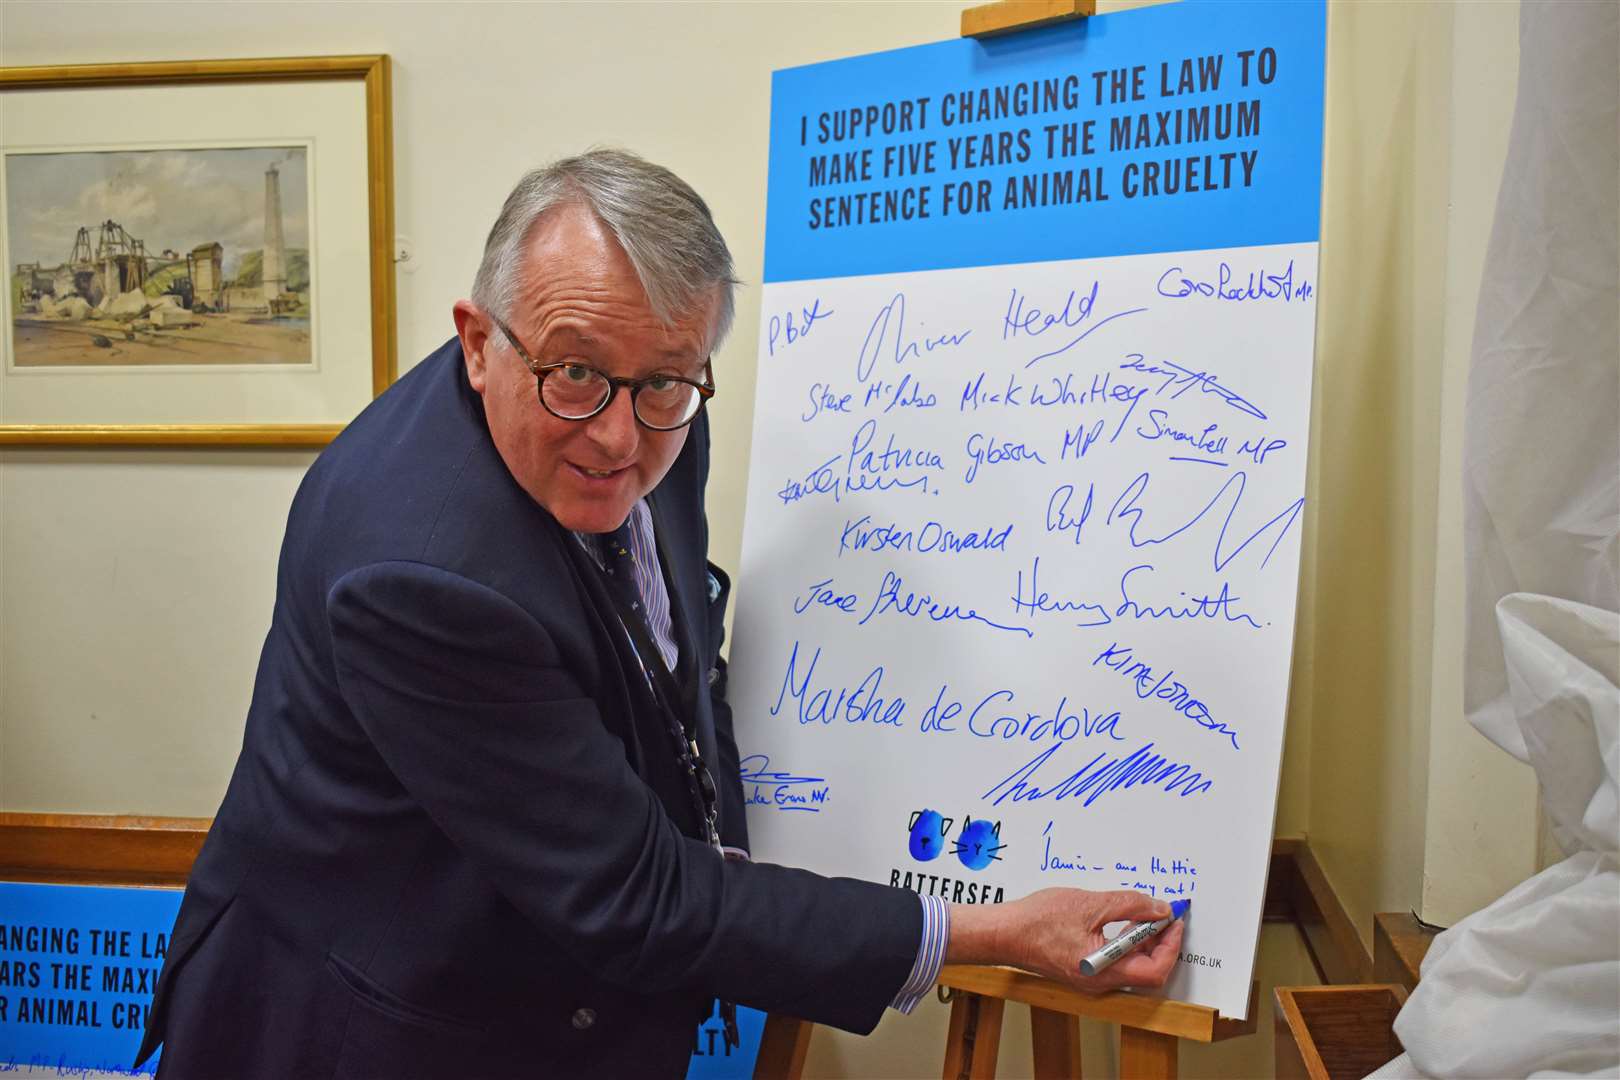 Jamie Stone MP signs the pledge on behalf of himself and his cat Hattie, calling for an increase in sentences for animal cruelty.